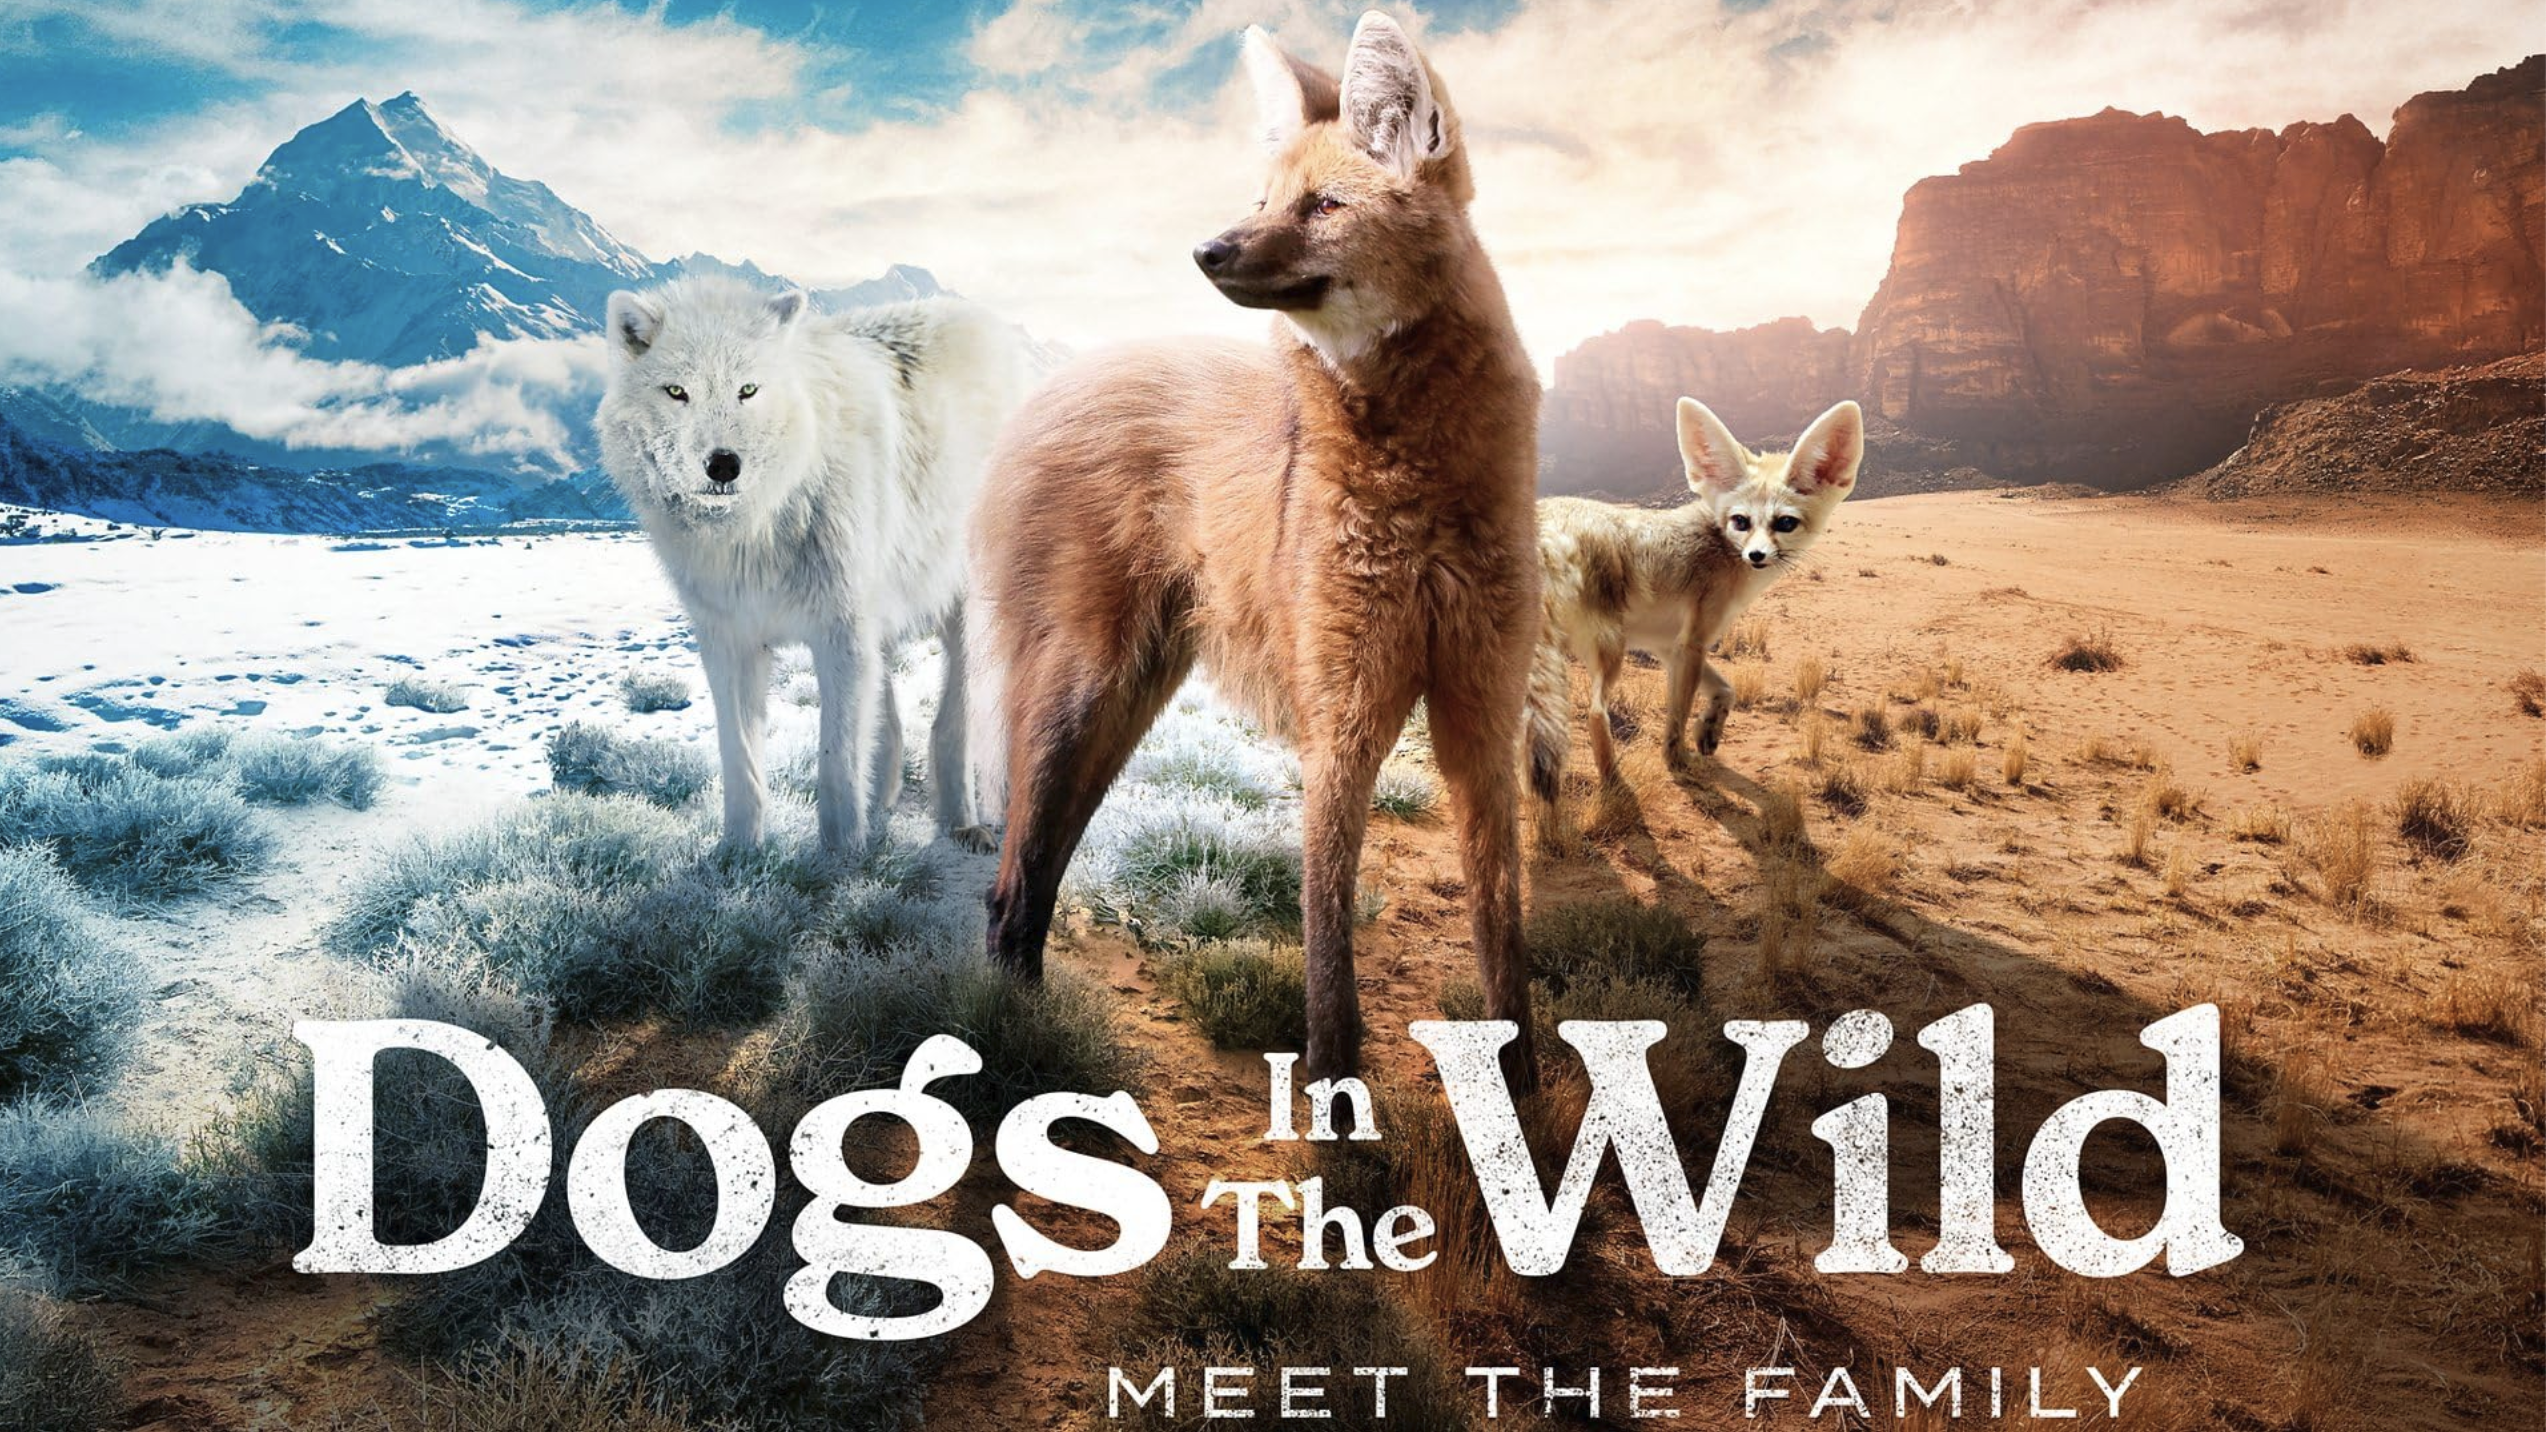 Series “Dogs in the Wild” launched by the BBC